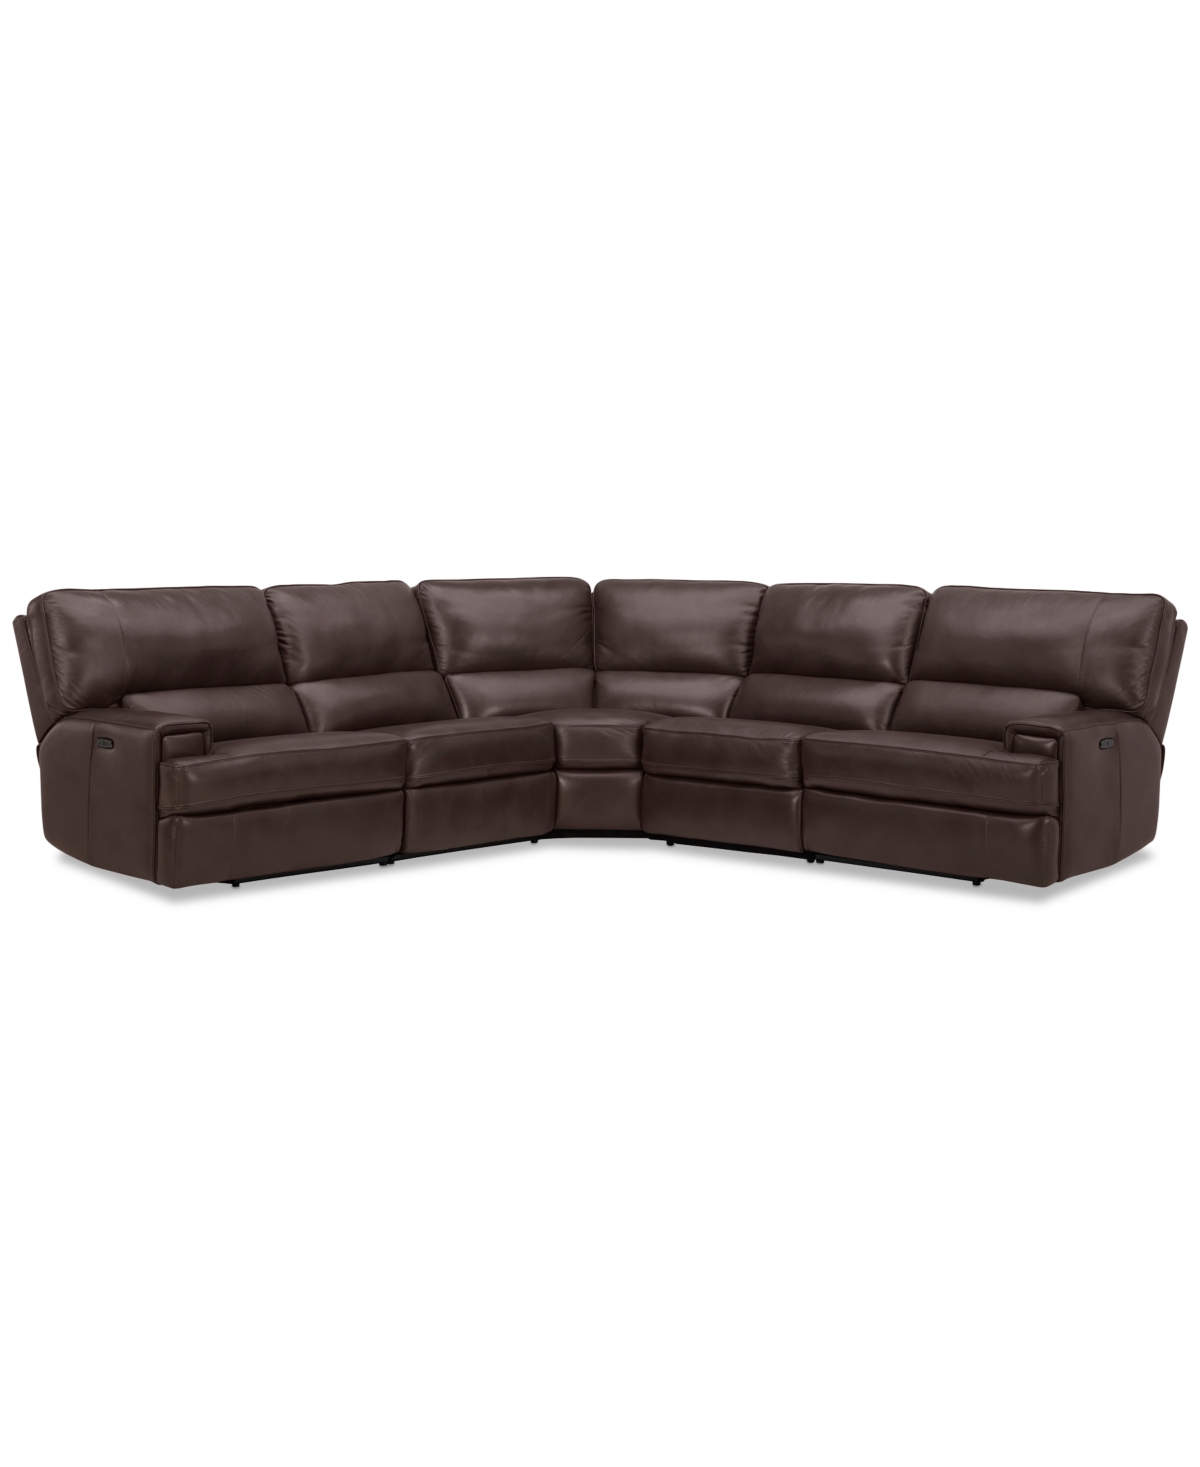 Furniture Binardo 123" 5 Pc Zero Gravity Leather Sectional With 3 Power Recliners, Created For Macy's In Walnut